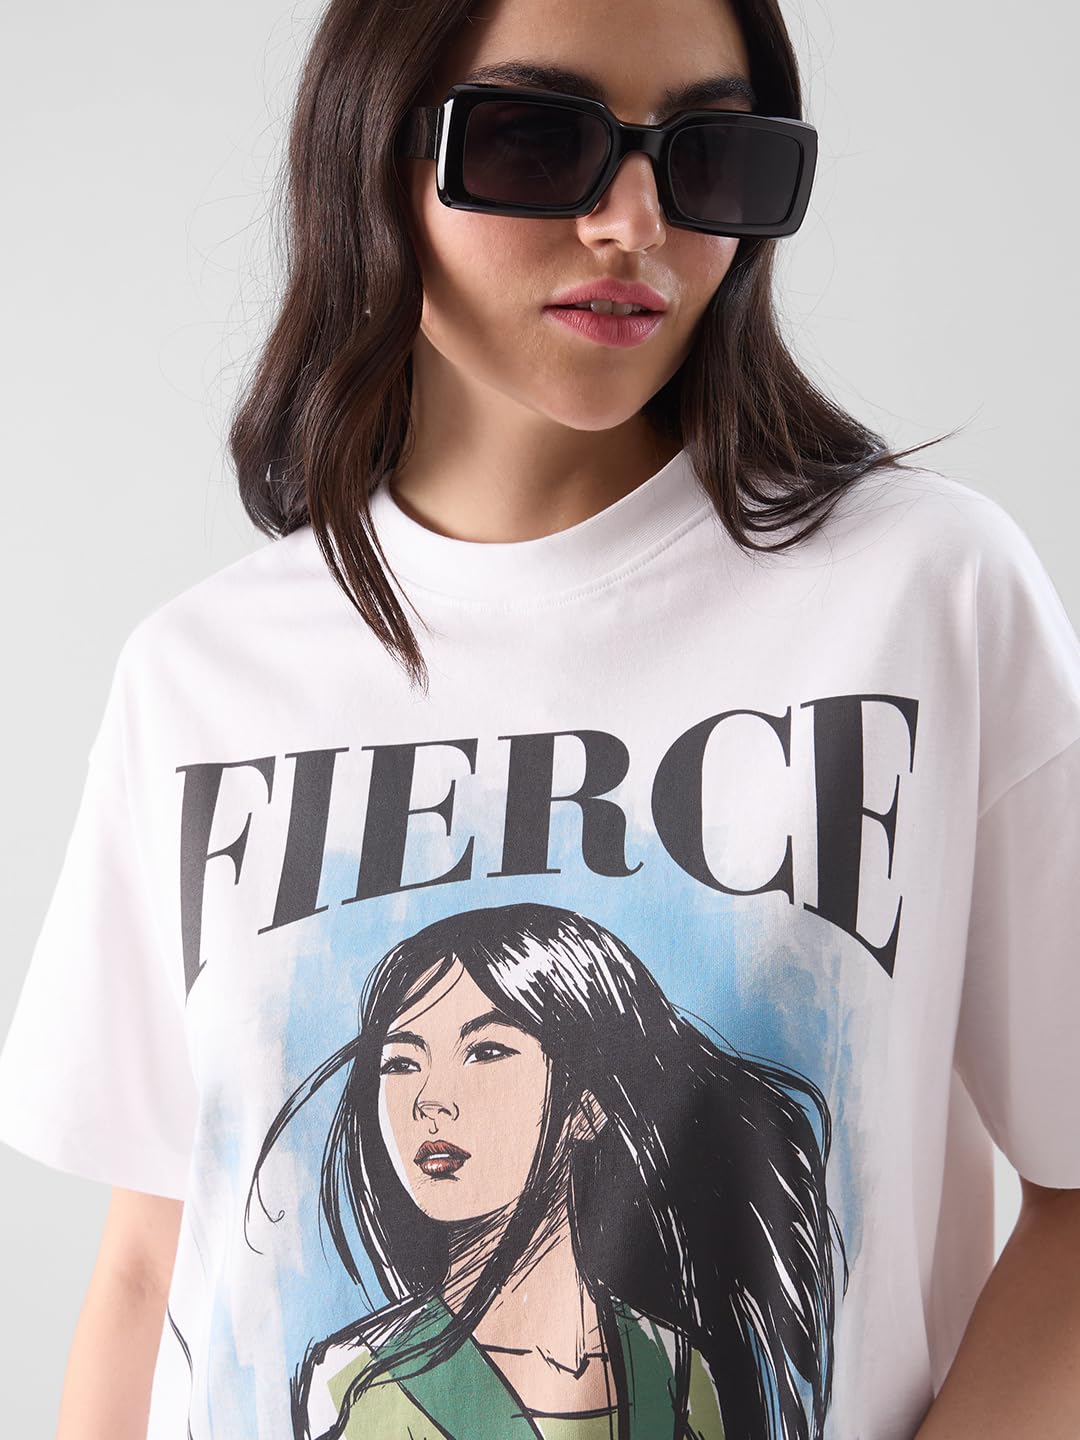 The Souled Store Mulan: Fierce Womens Oversized Fit Graphic Printed Half Sleeve Cotton White Women Oversized T-Shirts Women Oversized T-Shirts Fashionable Trendy Graphic Prints Pop Culture Merchandise